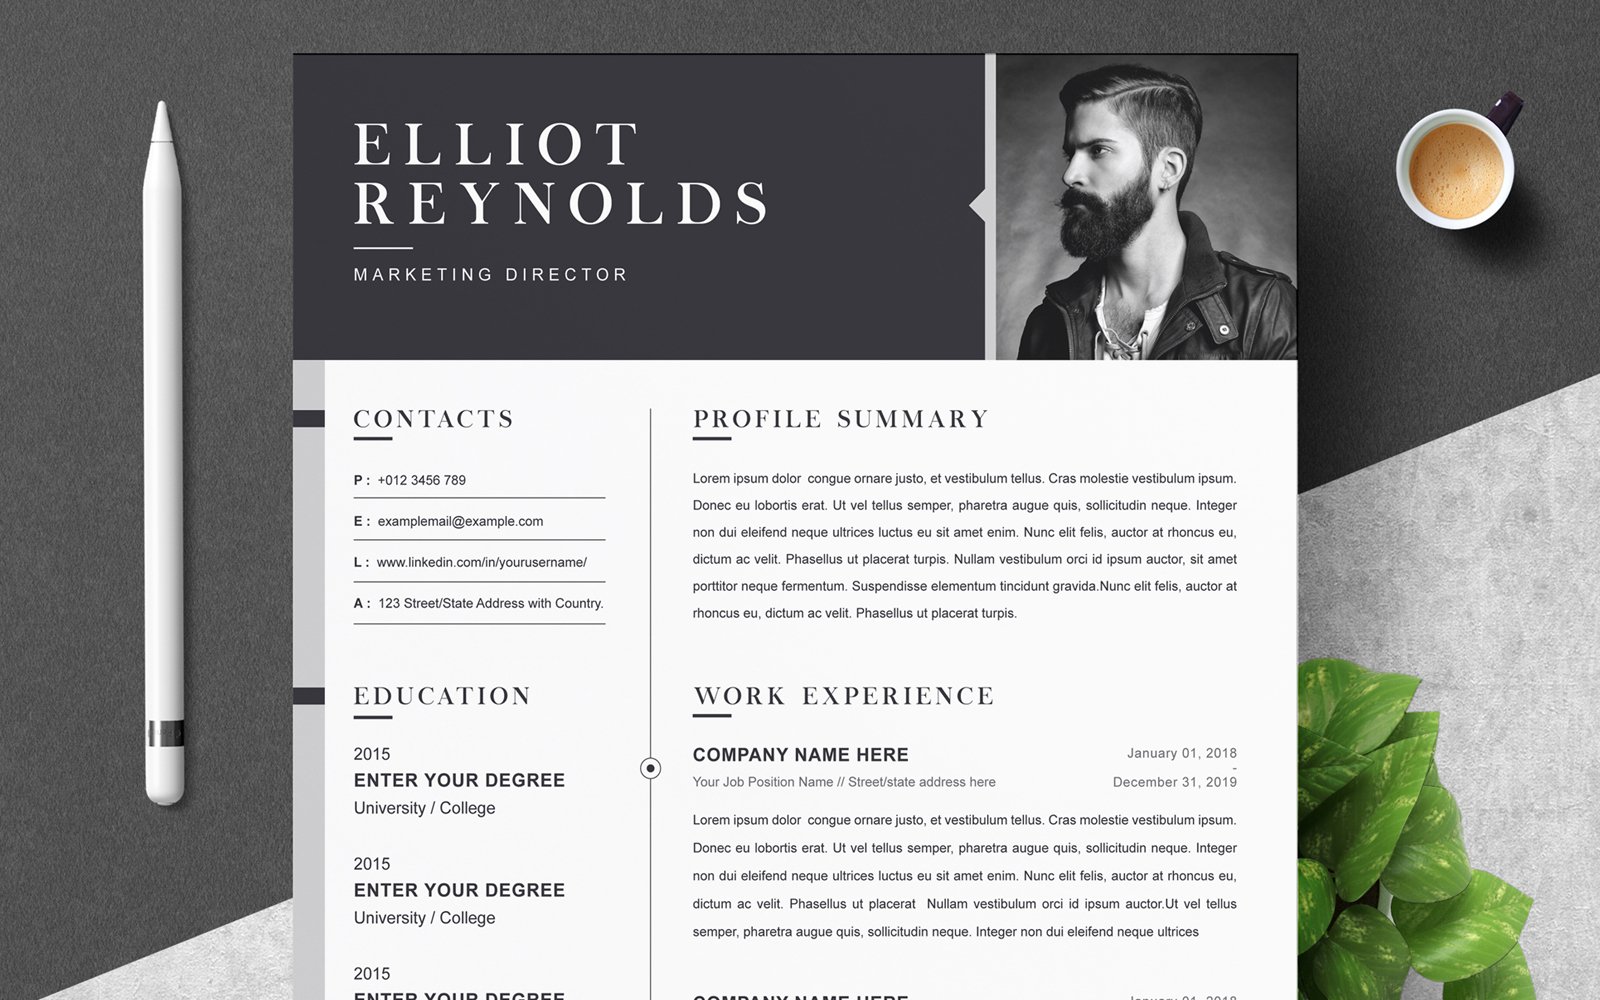 Template #221879 Resume Template Webdesign Template - Logo template Preview